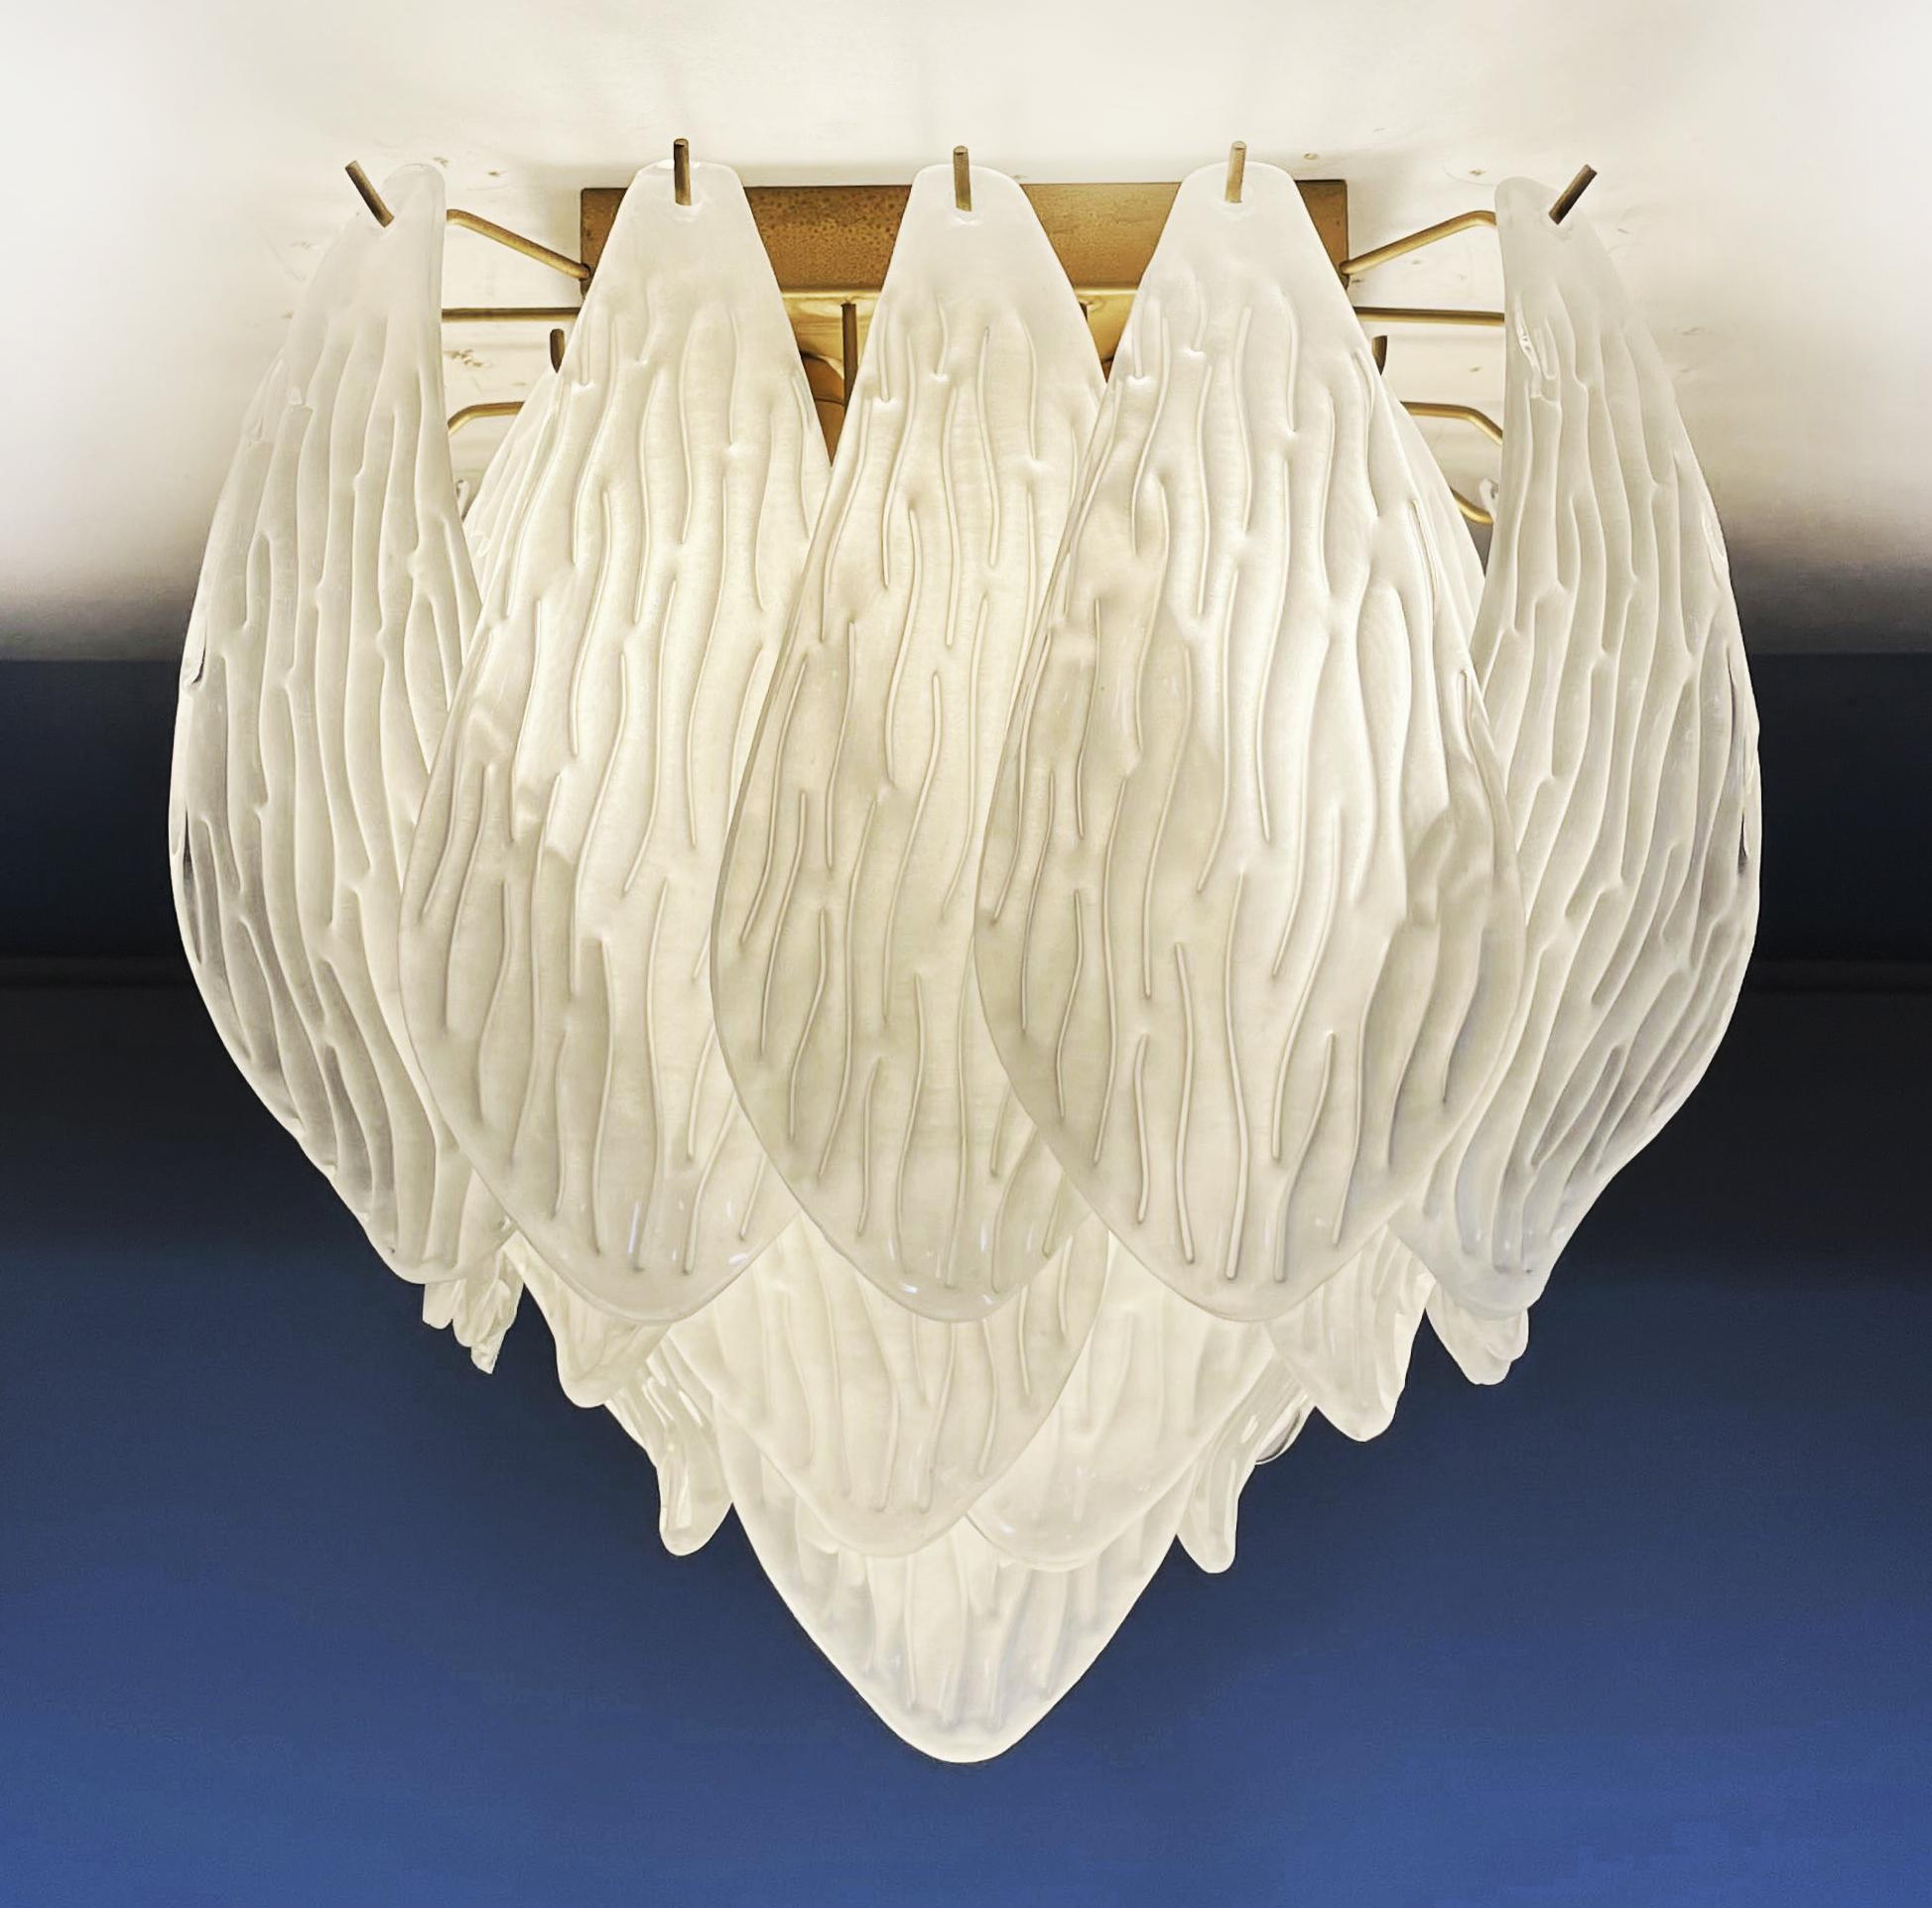 Spectacular ceiling lamps with 32 Murano frosted carved glass leaves in golden painted metal frame. Elegant lighting object. Period: late XX century
Dimensions: 17,50 inchs (45 cm) height; 15,50 inches (40 cm) width; 15,50 inches (40 cm)